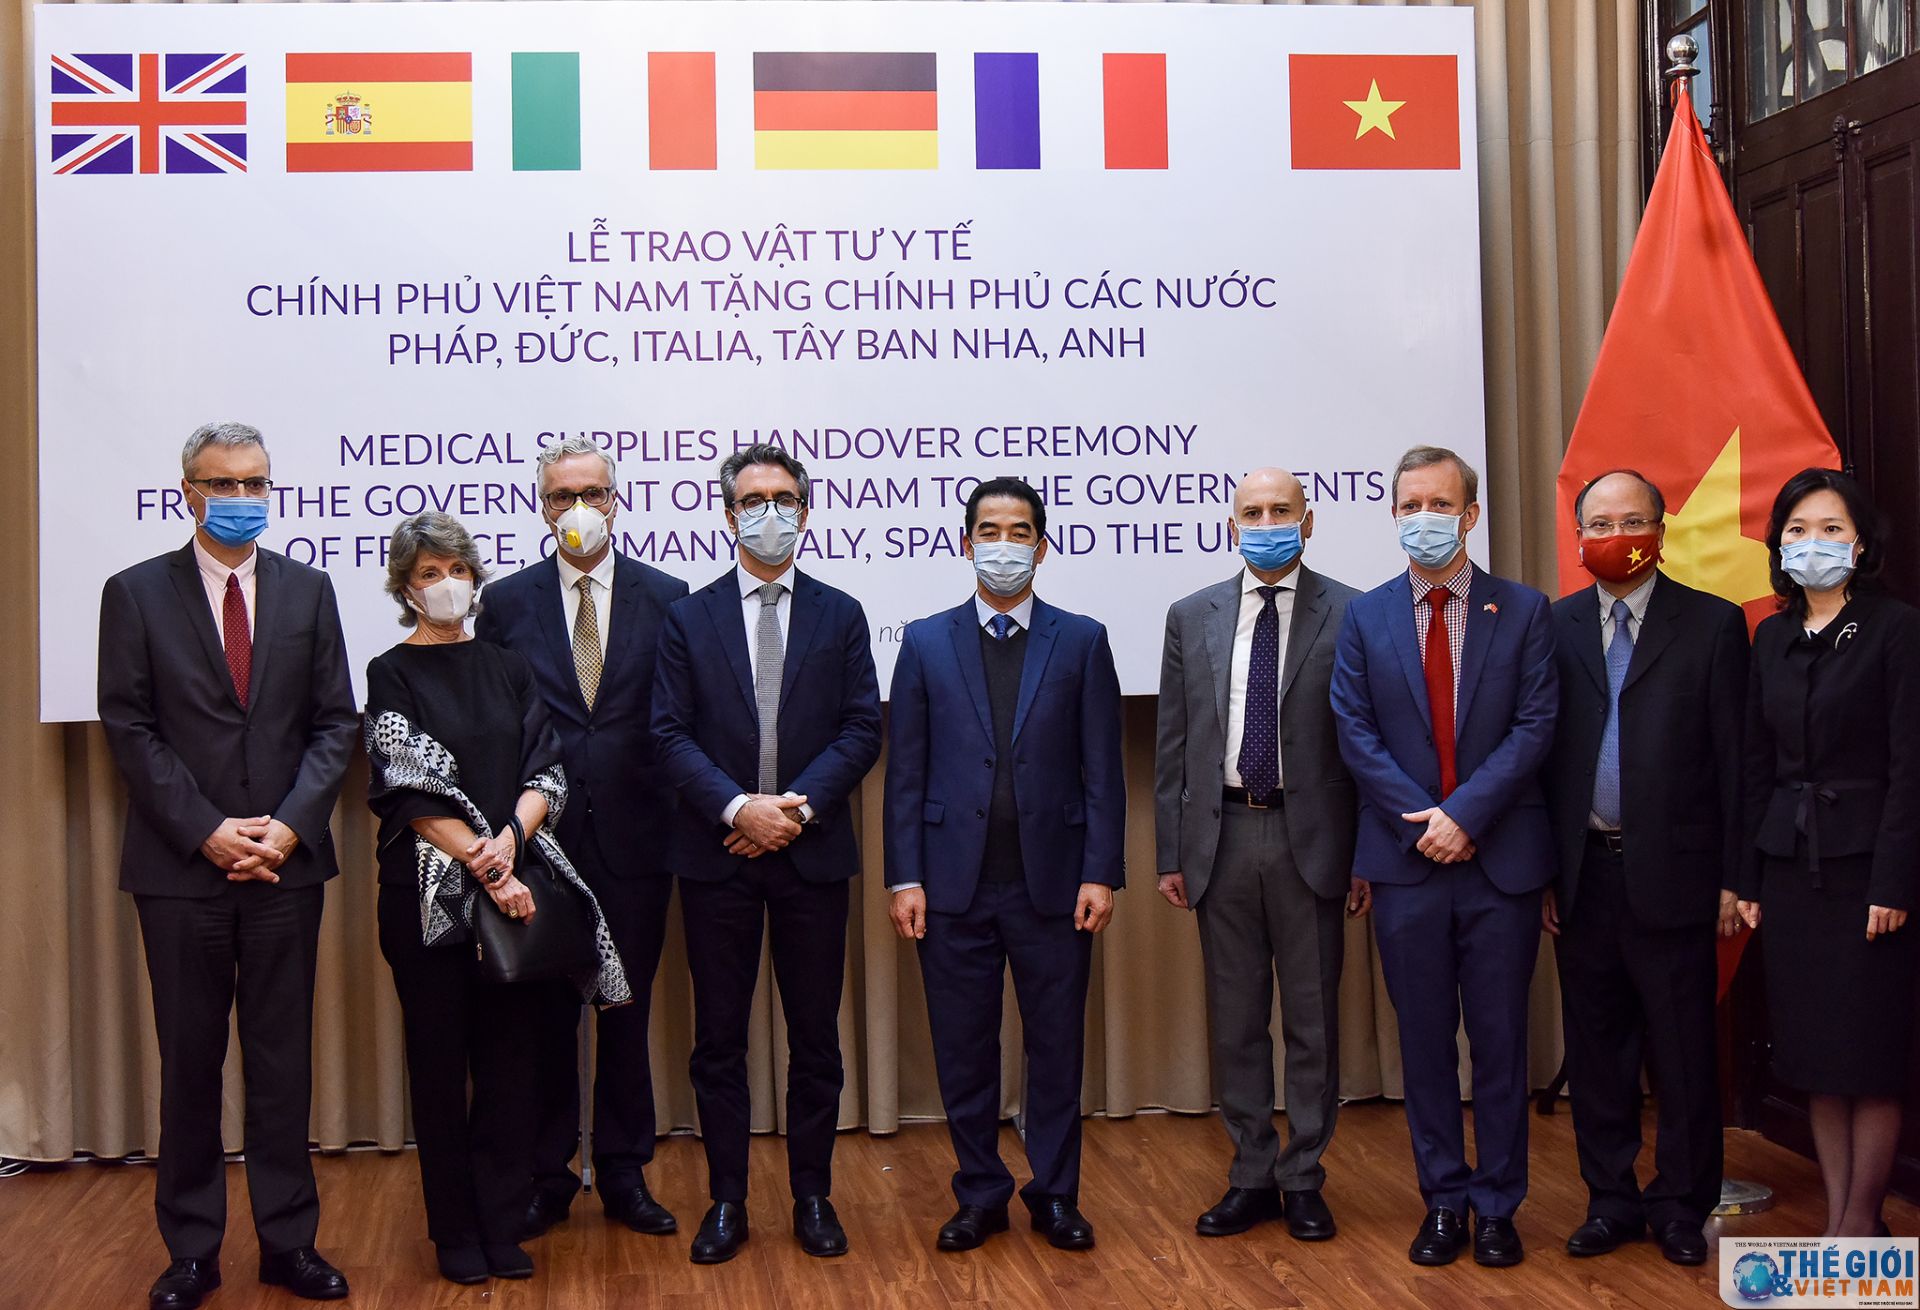 vietnam presents antibacterial masks to european countries to help fight the covid 19 pandemic